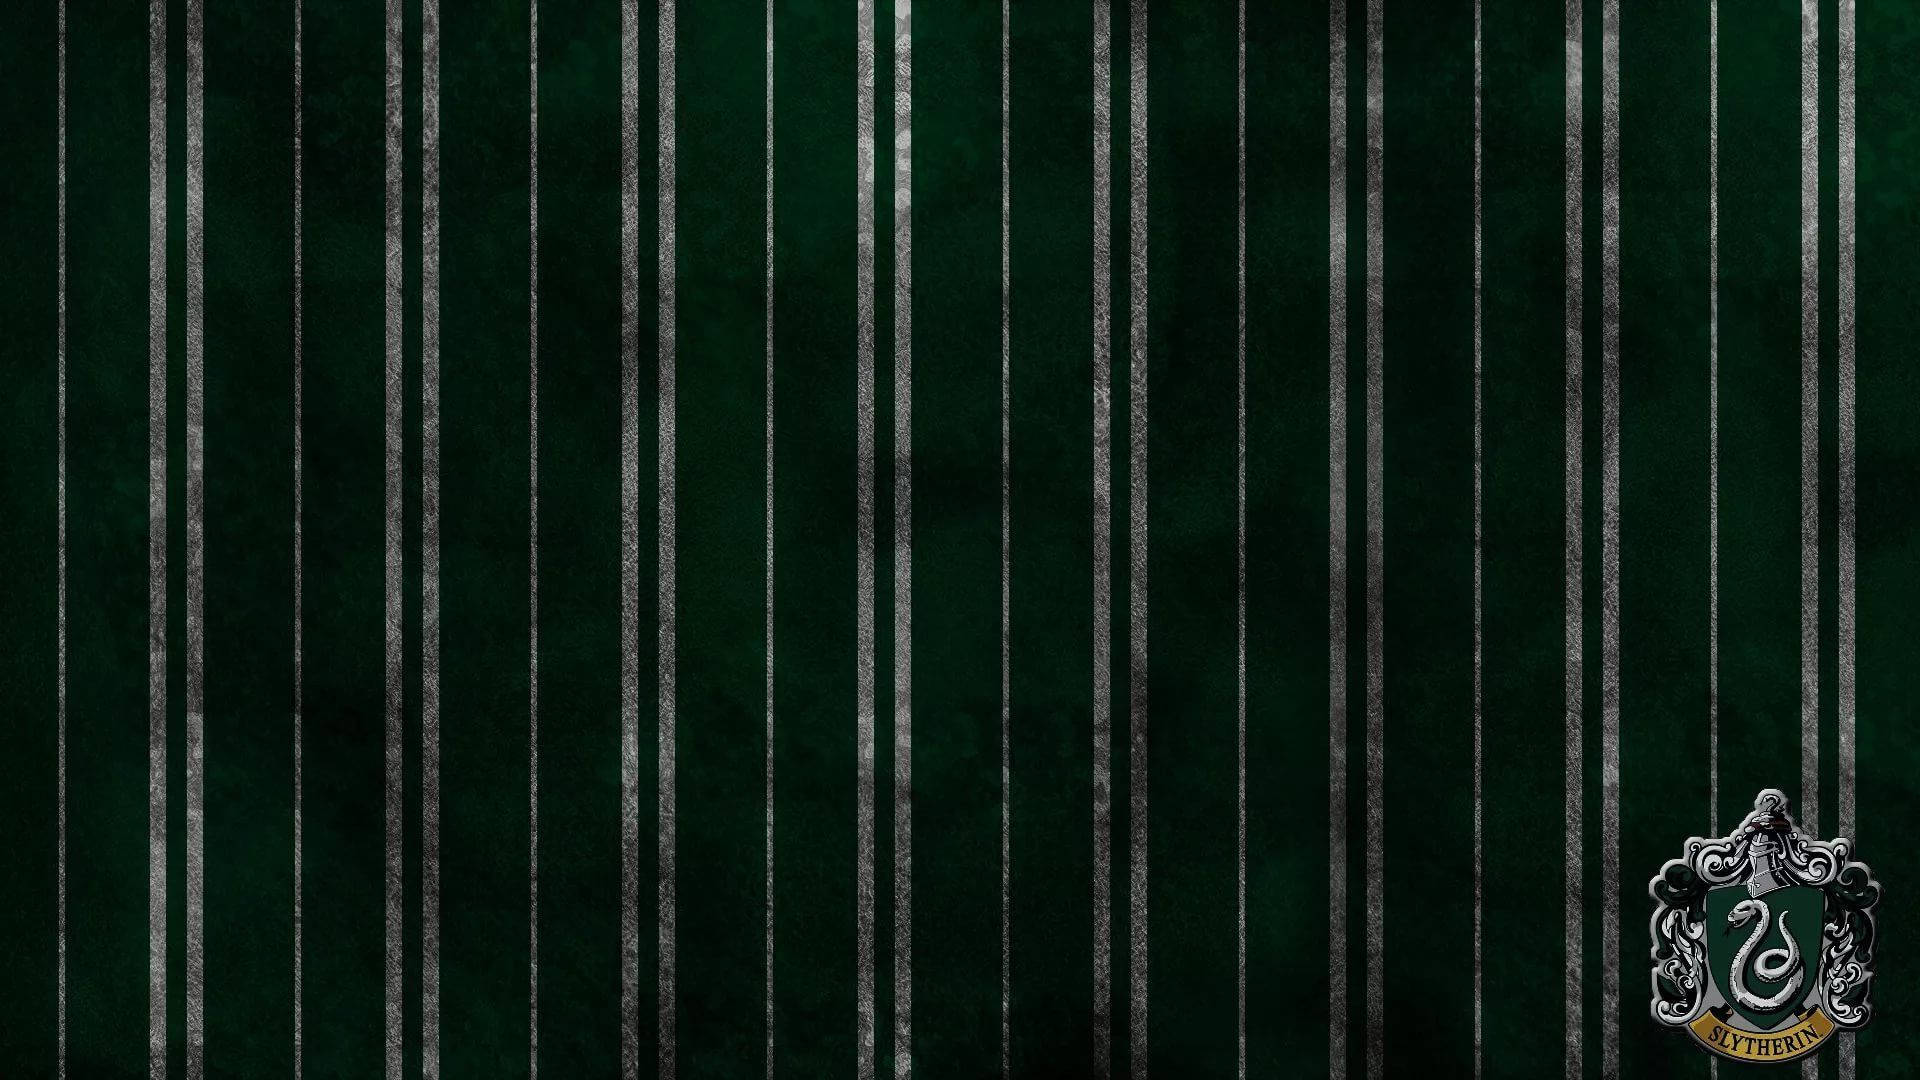 Slytherin Aesthetic 1920X1080 Wallpaper and Background Image